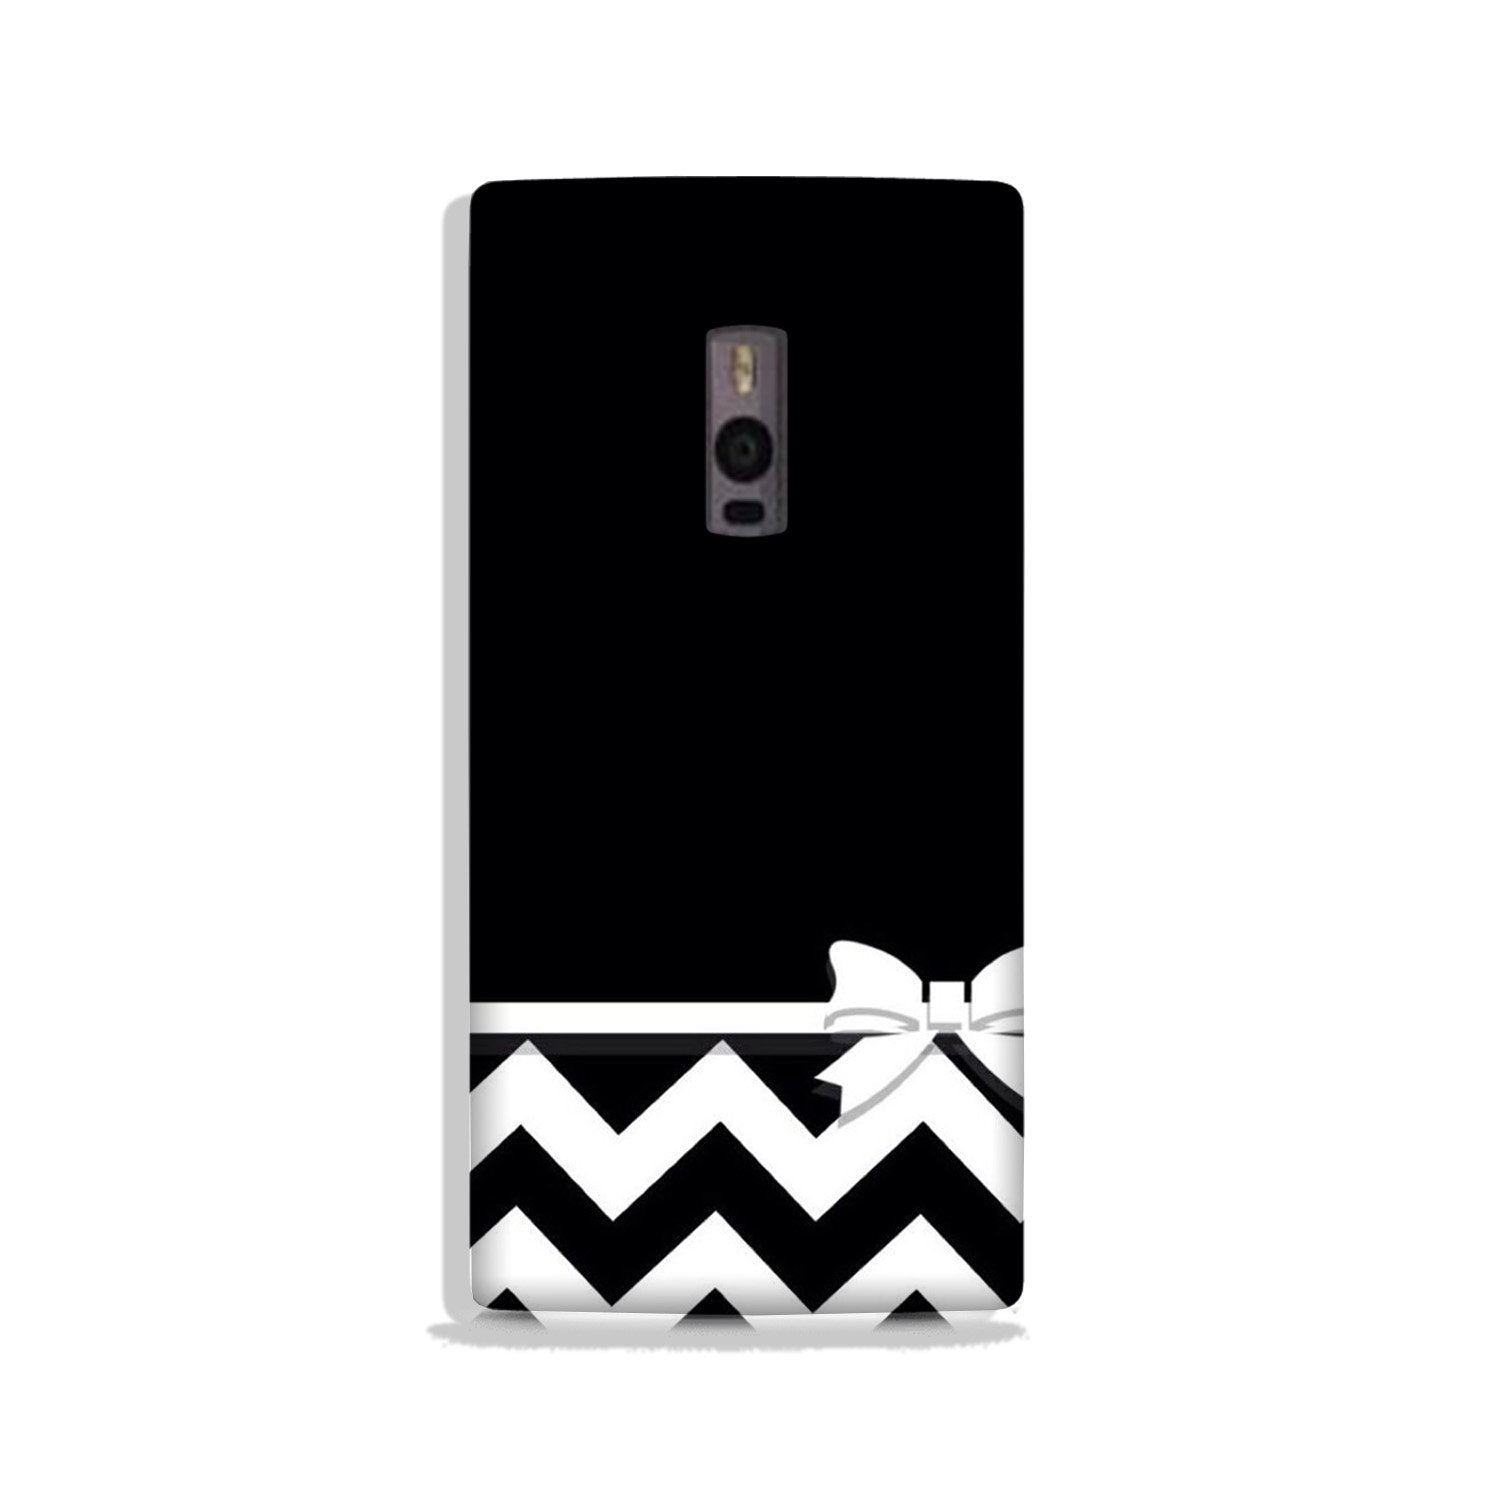 Gift Wrap7 Case for OnePlus 2